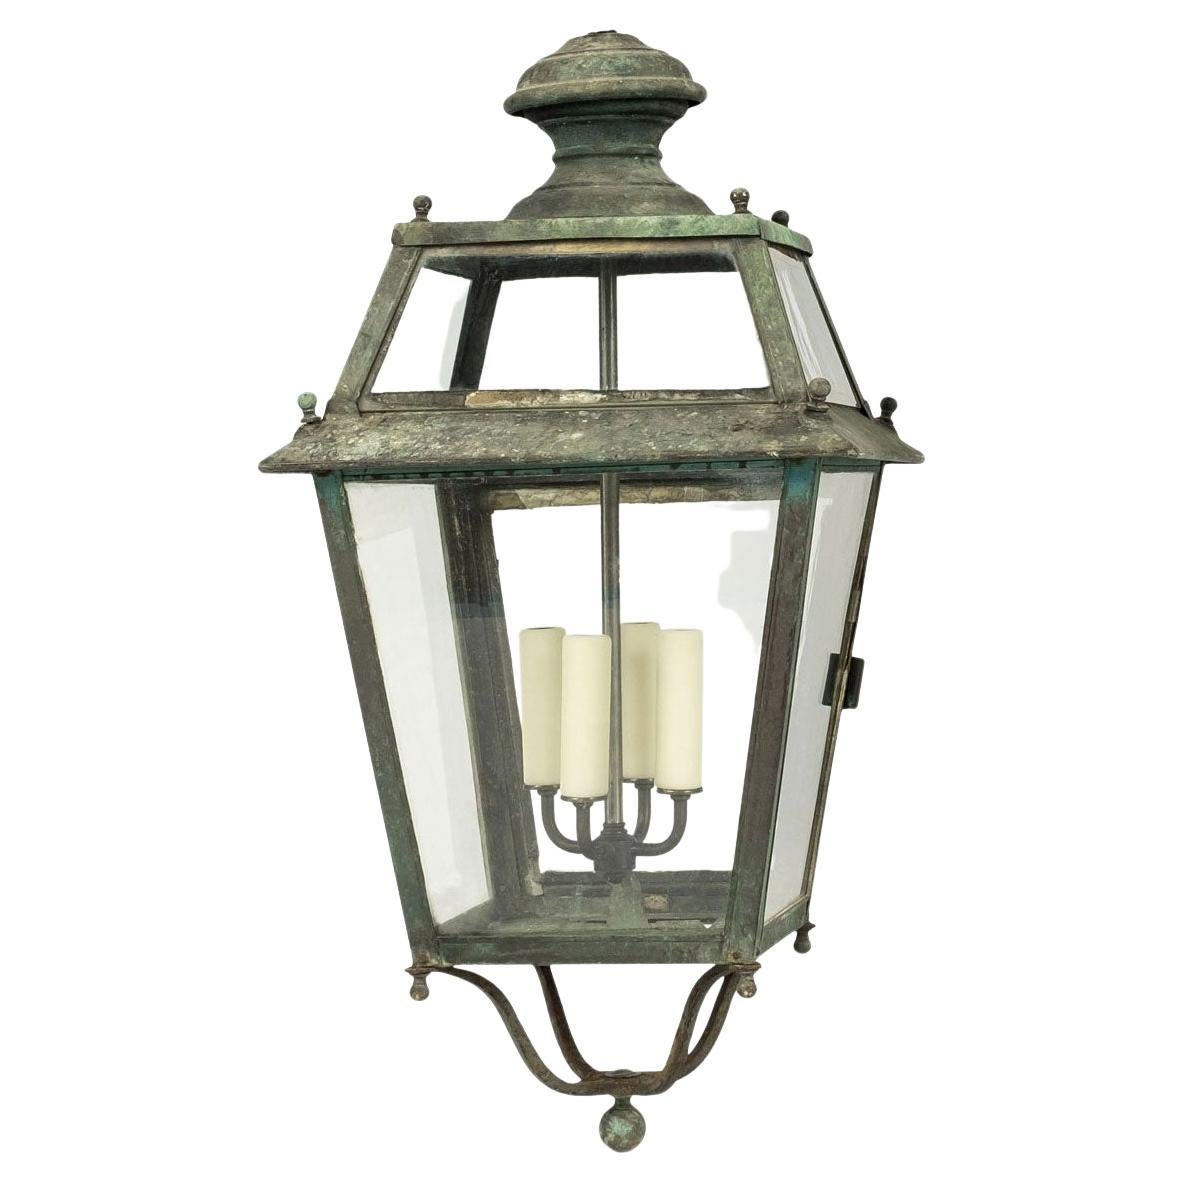 Tole and Glass French Lantern